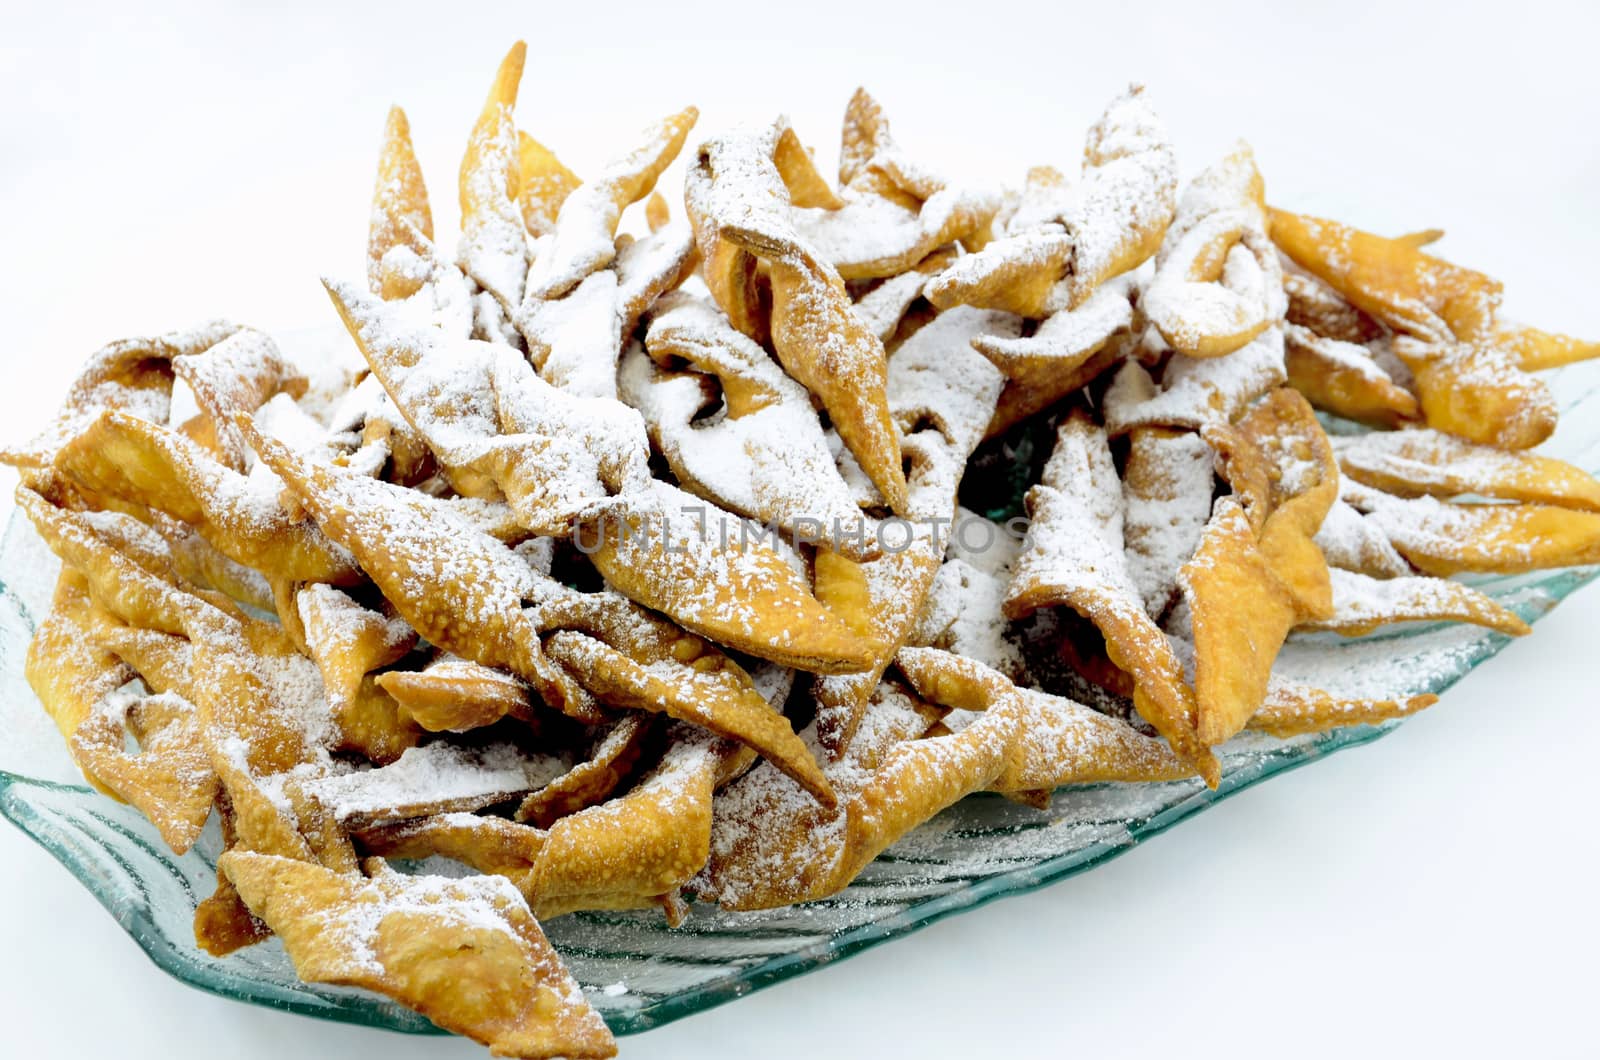 Chrust (faworek) funnel cake - Polish fried cookie (a kind of cracknels) with powdered sugar.
